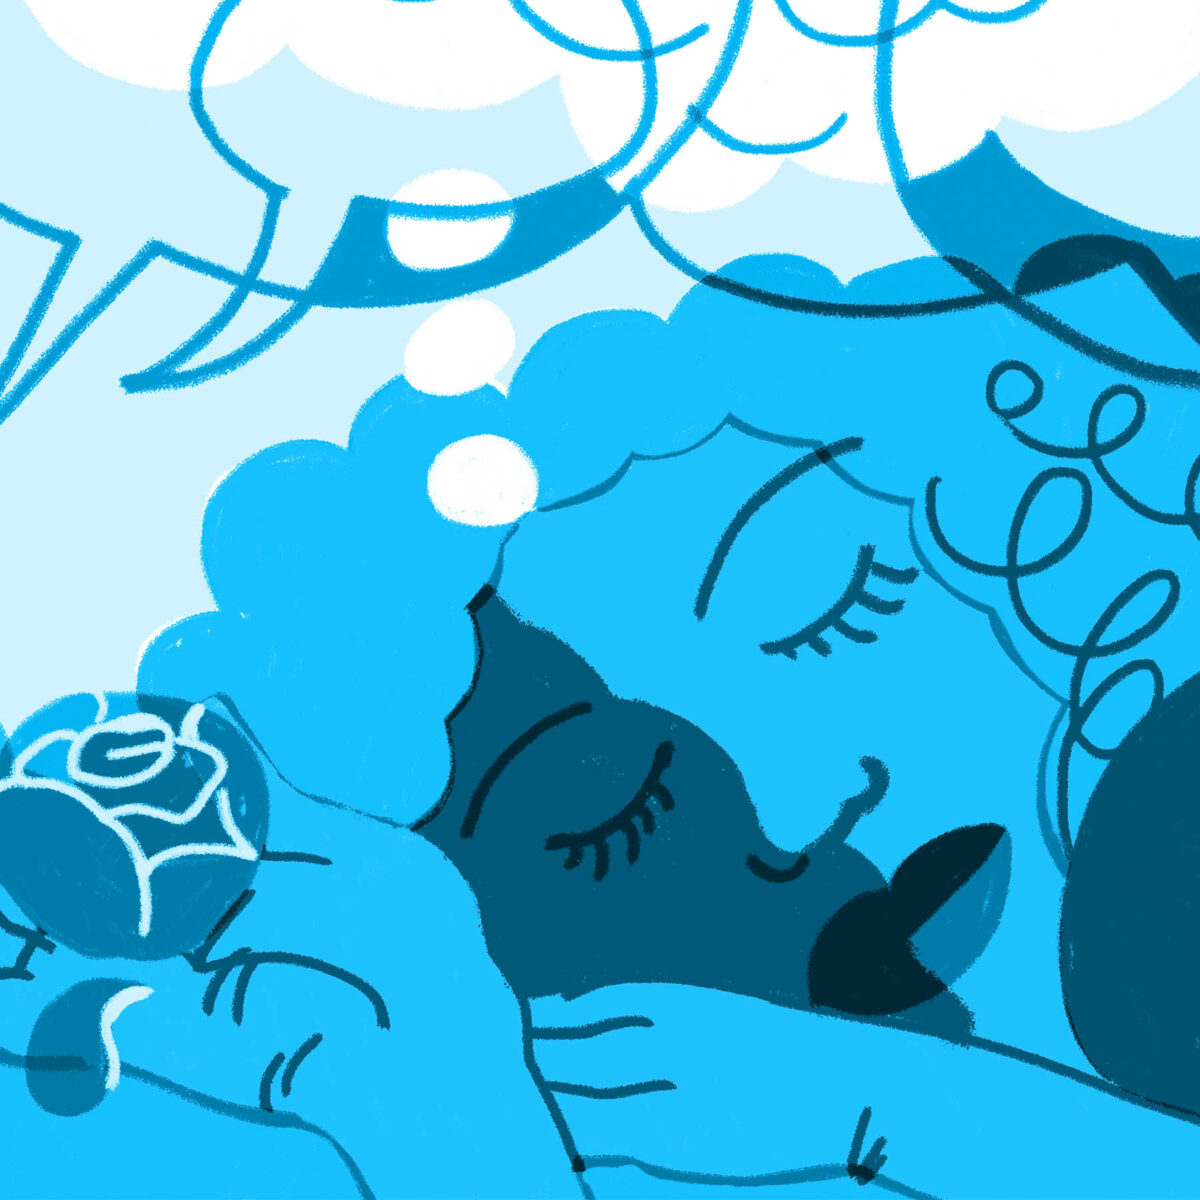 Illustration of a dreaming woman, drawn in shades of blue.